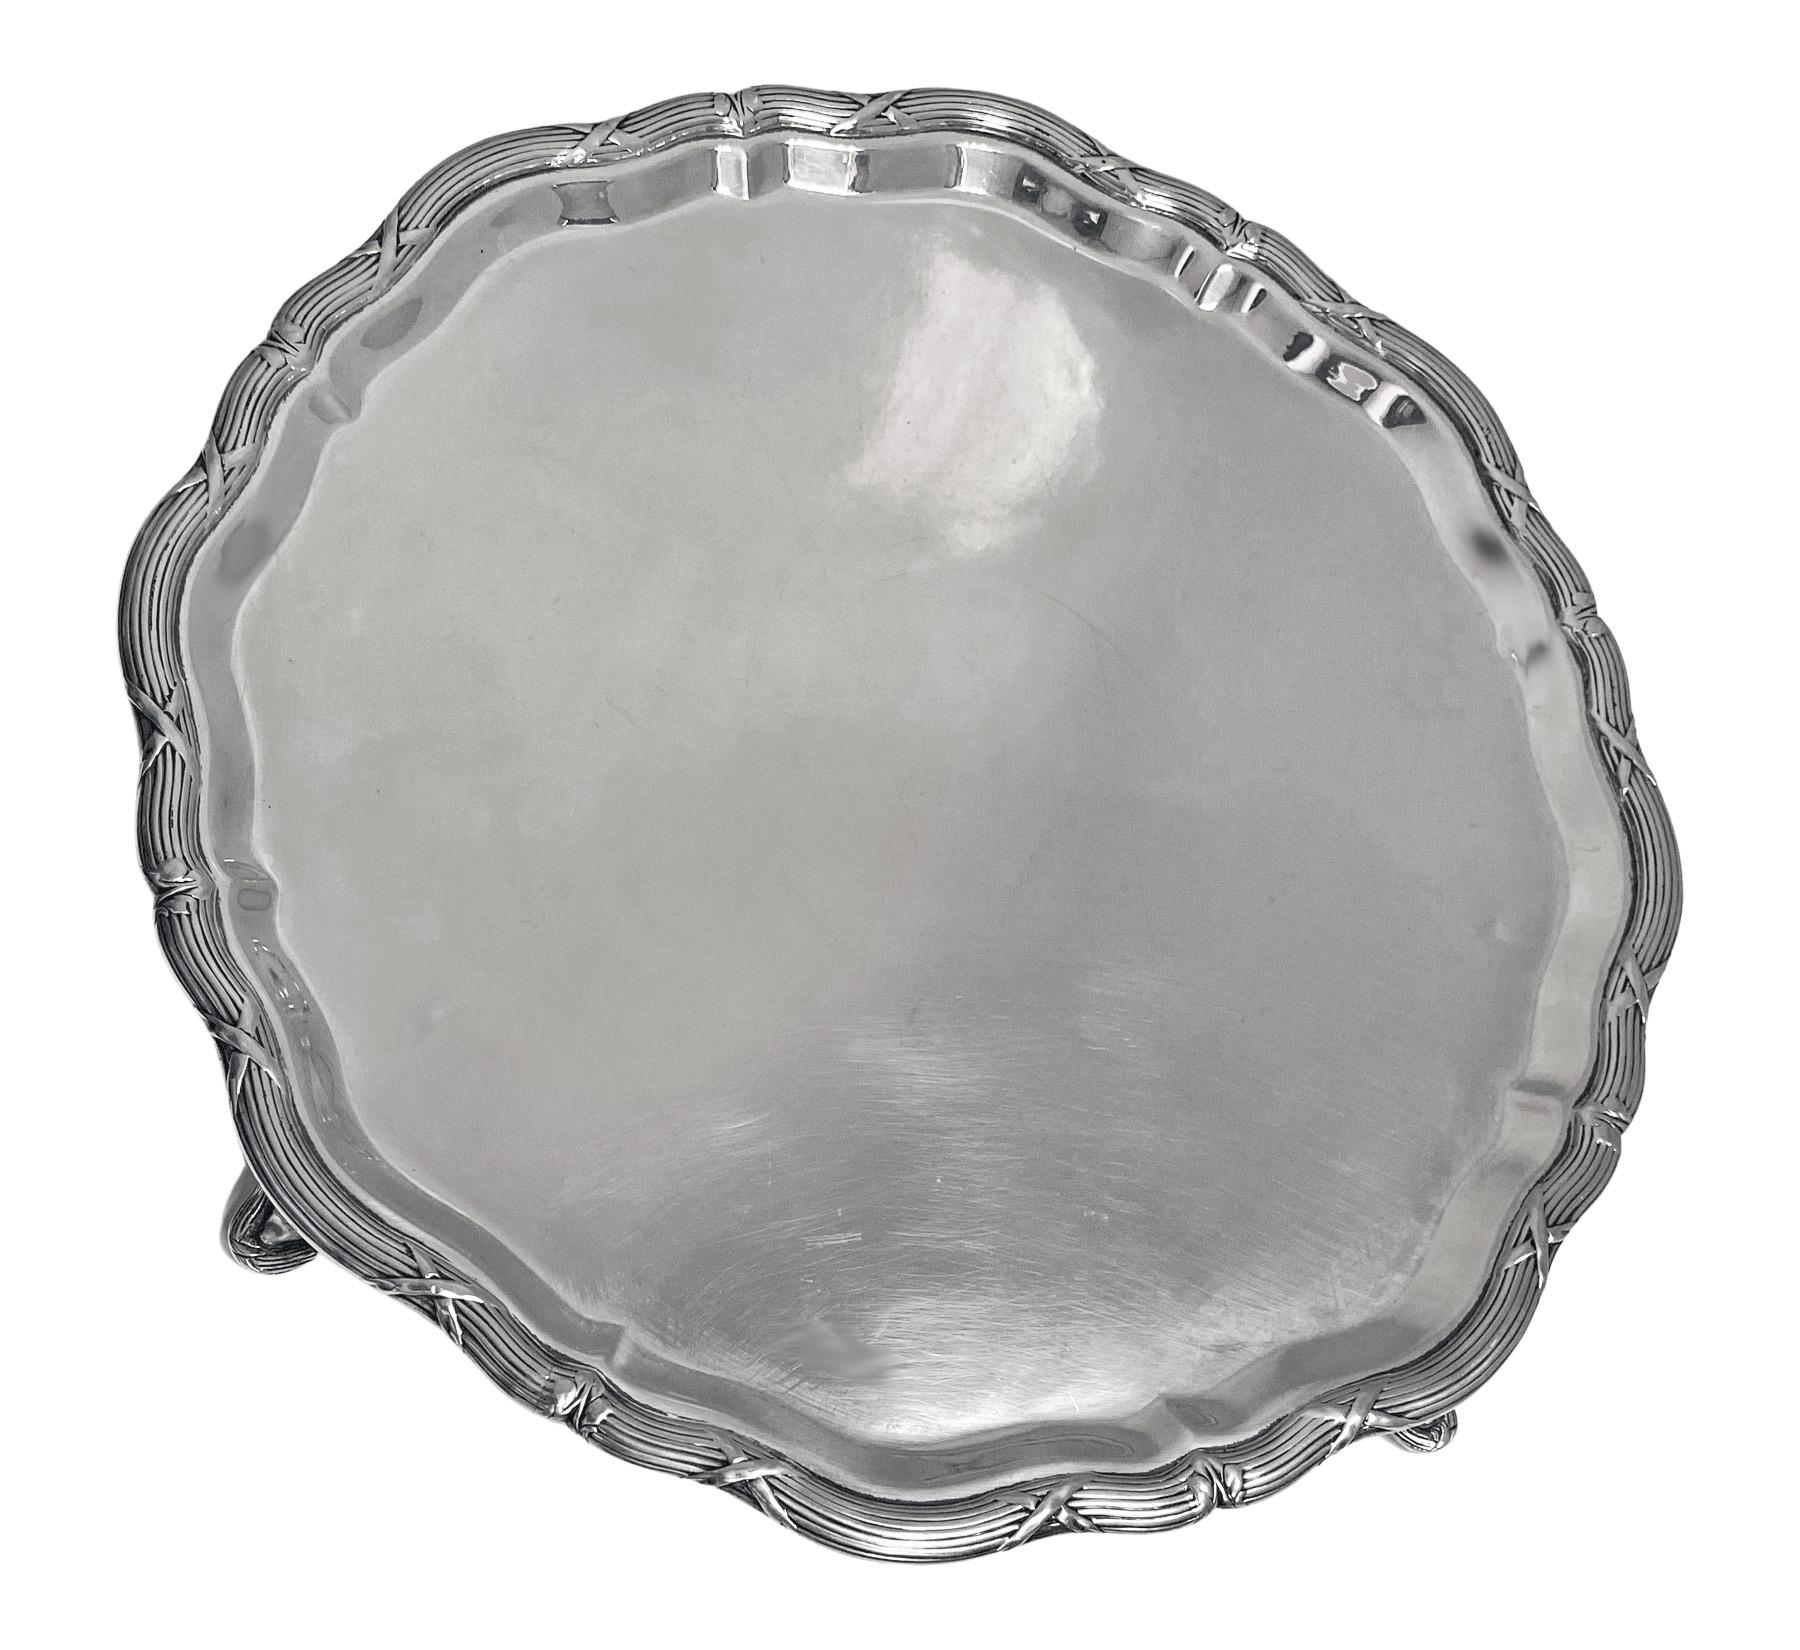 English Antique Sterling Silver Salver Tray 1906 by J & J Maxfield Ltd For Sale